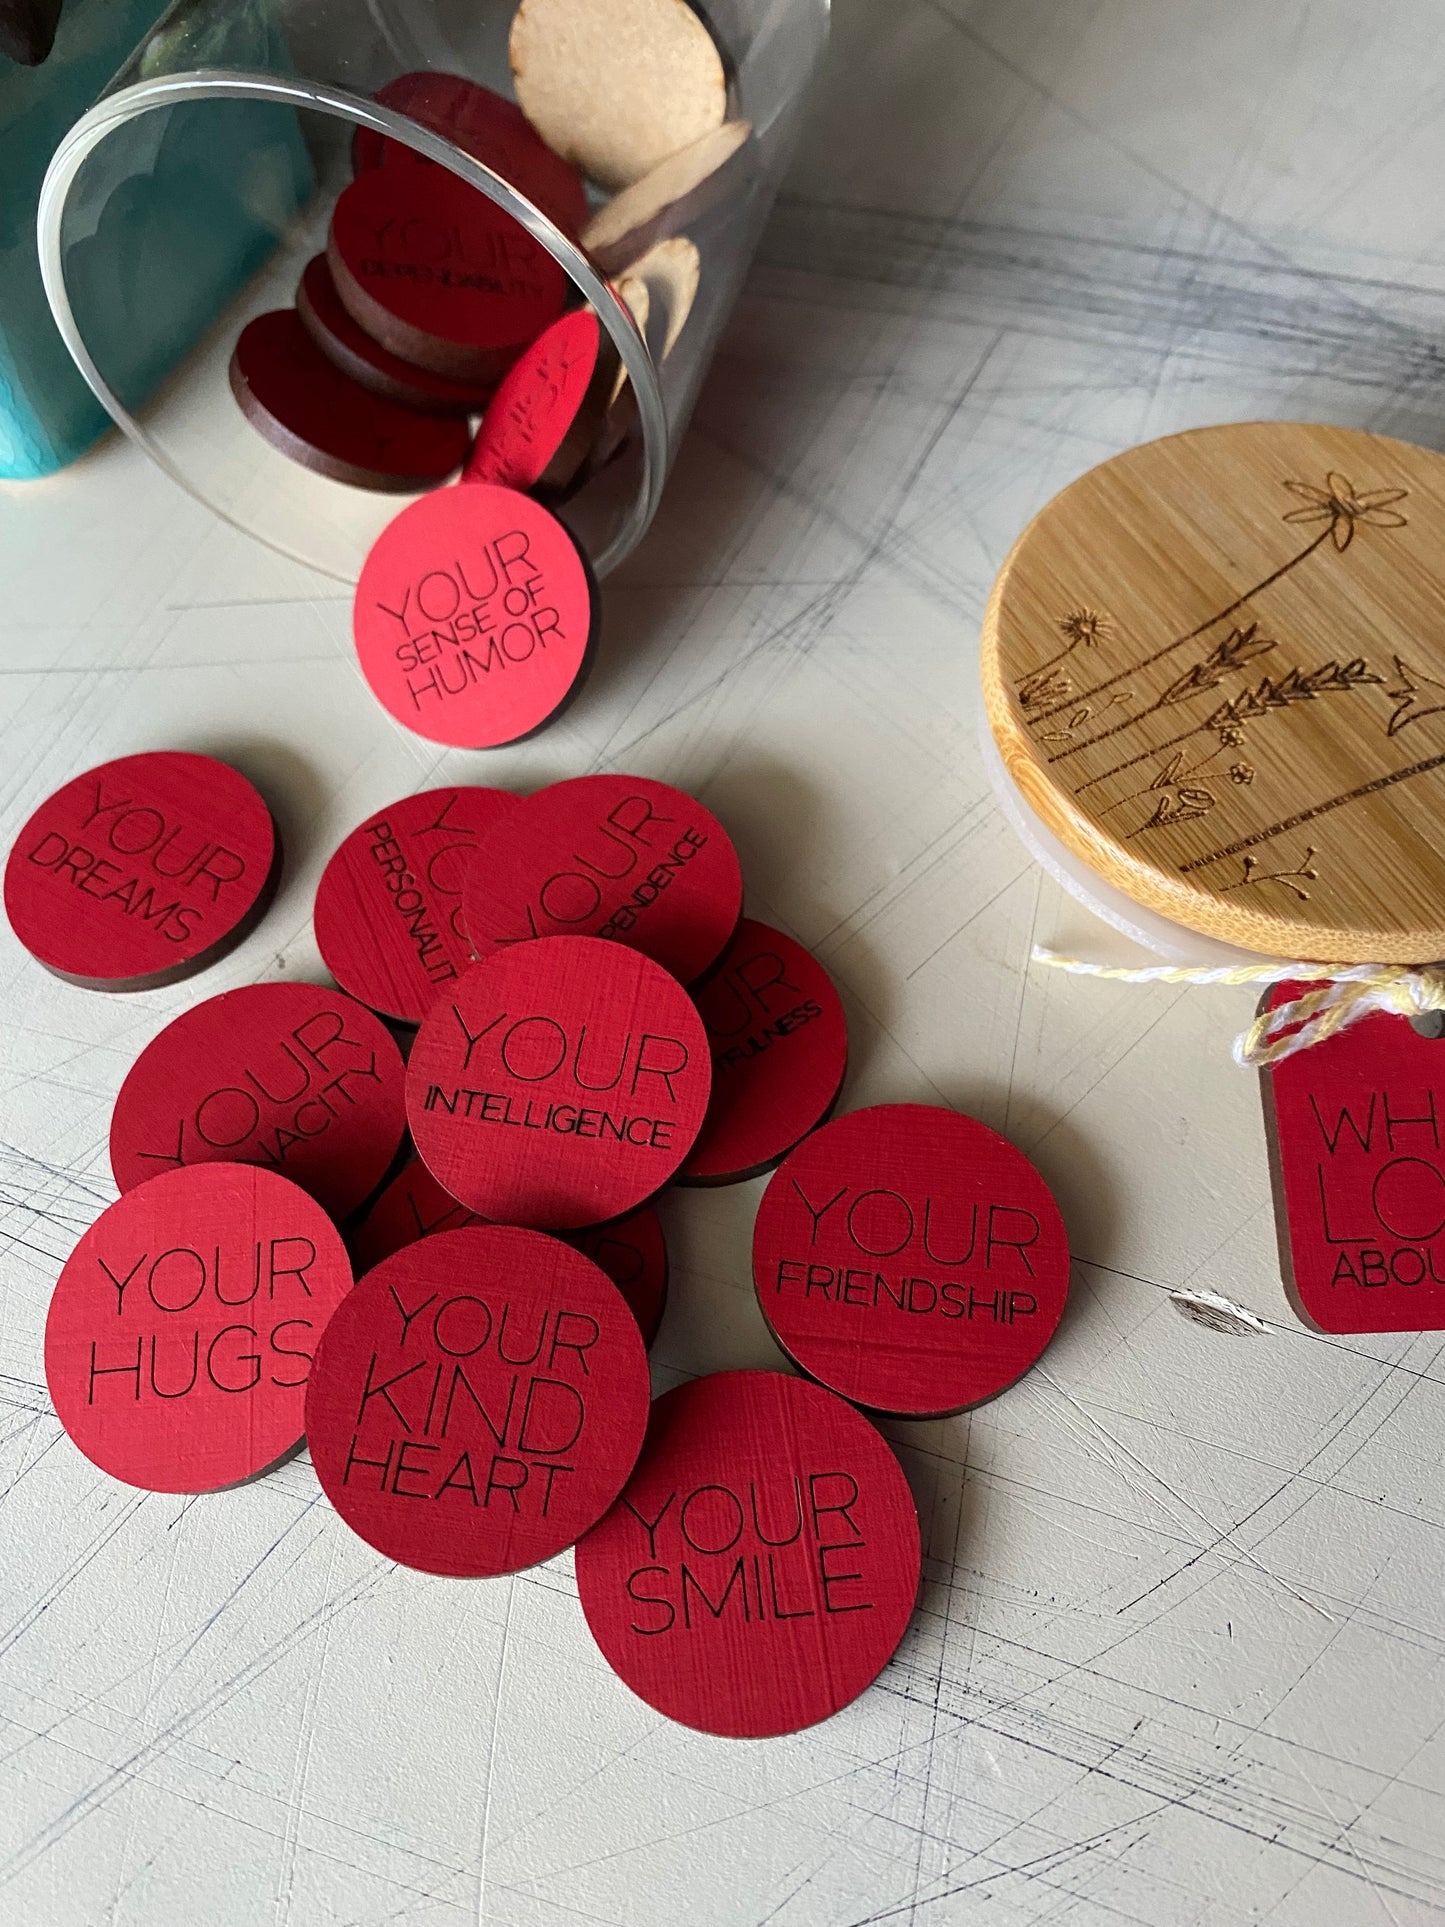 What I Love About You Token Jar - set of 25 engraved wood tokens